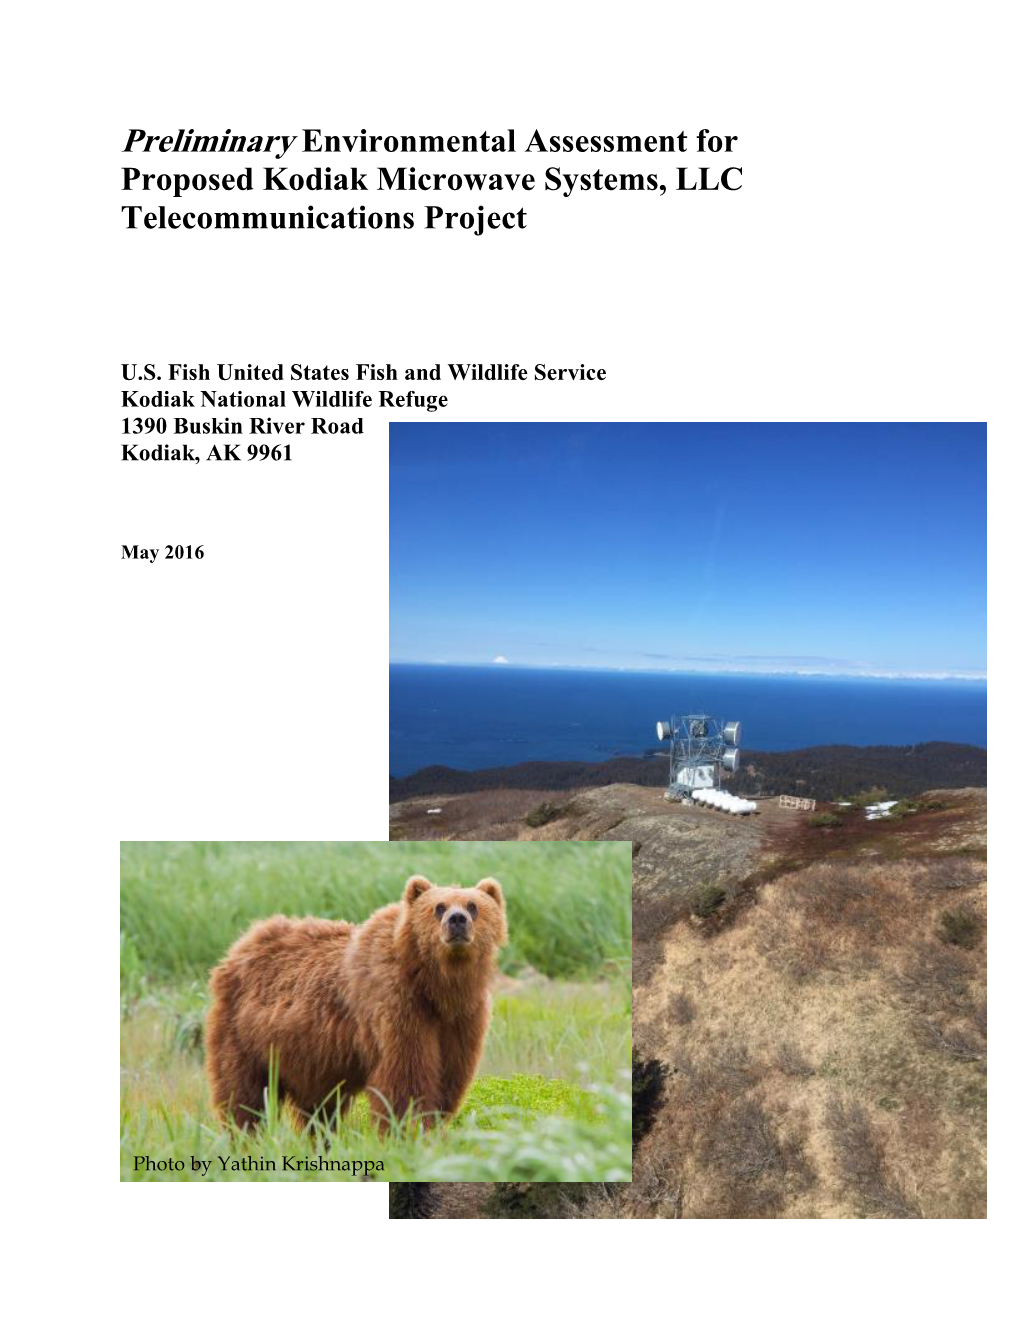 Preliminary Environmental Assessment for Proposed Kodiak Microwave Systems, LLC Telecommunications Project